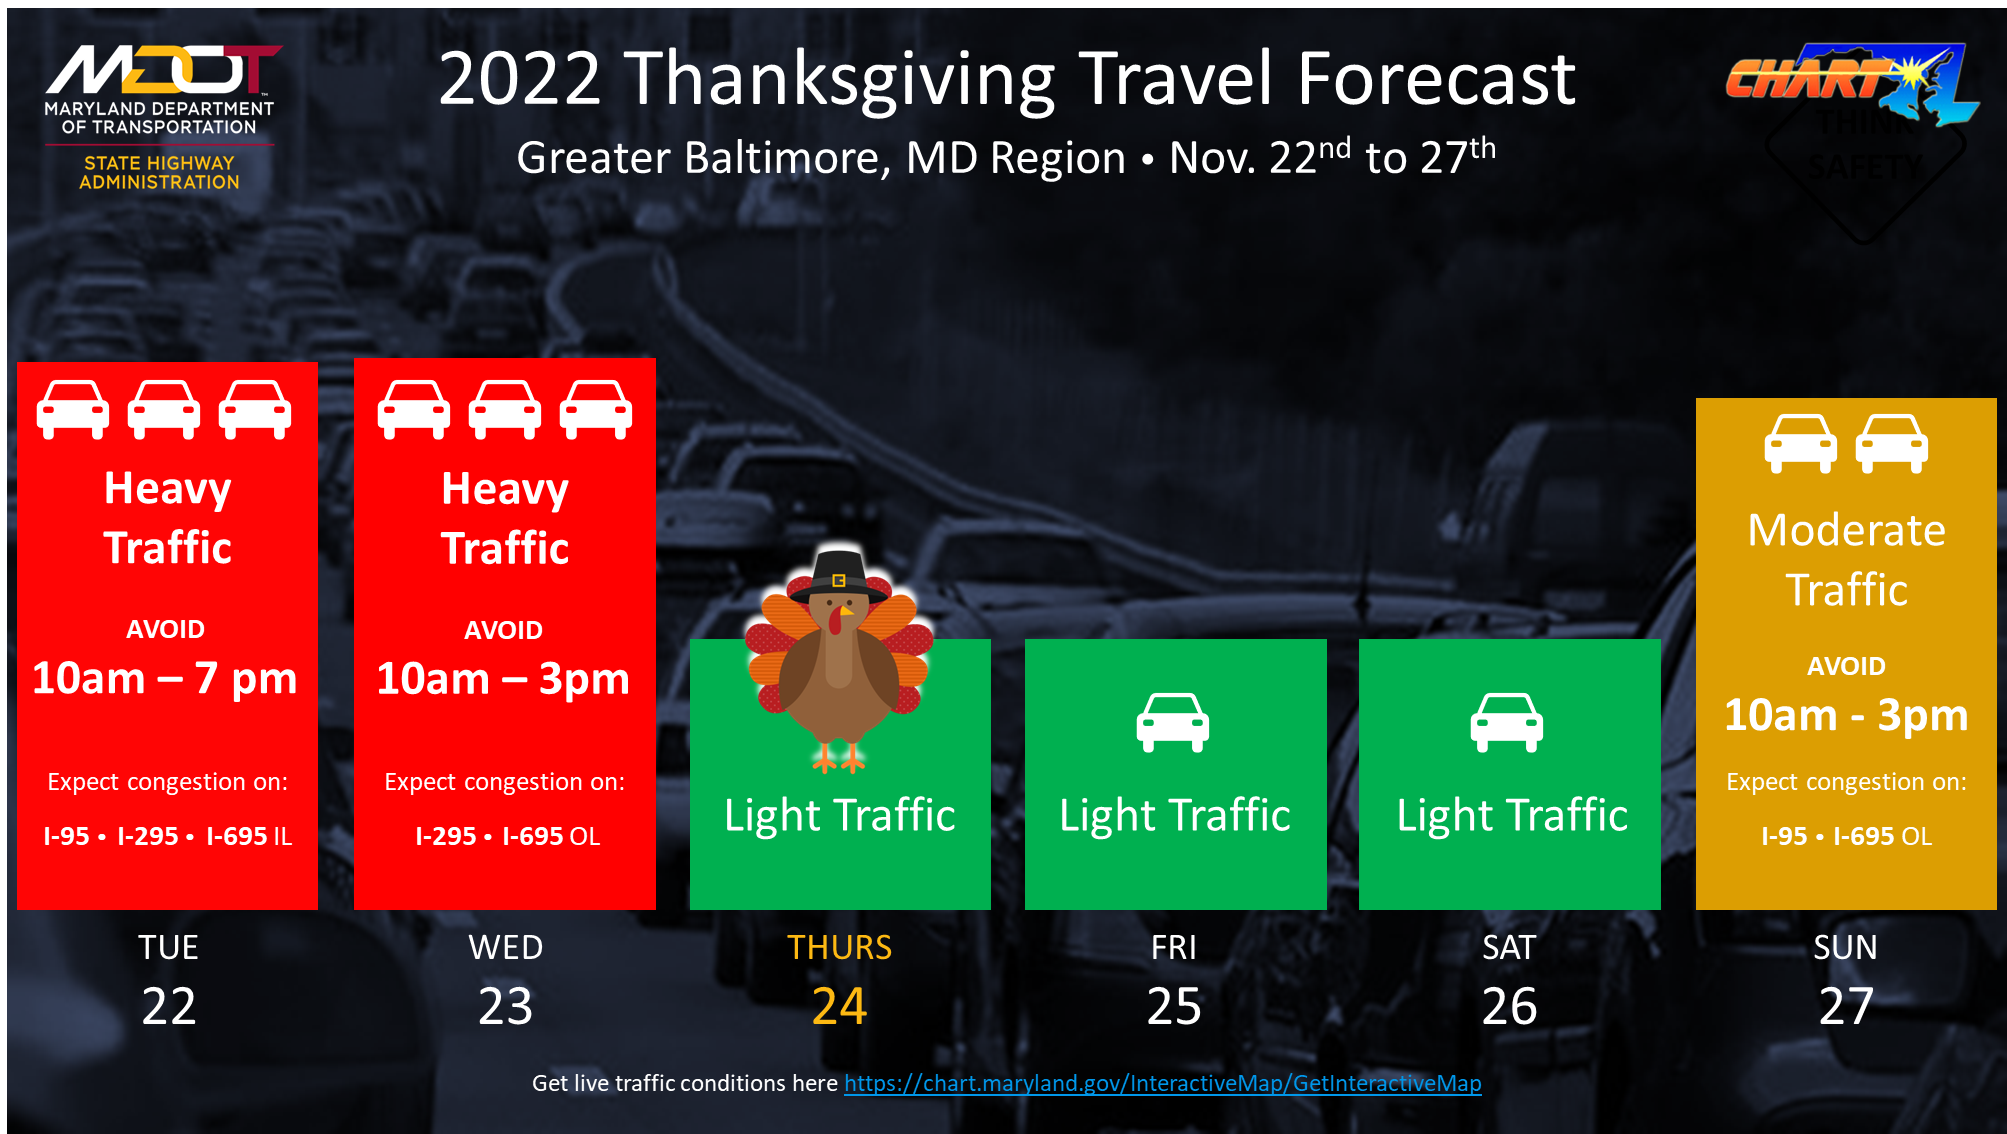 Screenshot of a completed forecast infographic. There is an MDOT logo in the top-left, a CHART logo in the top-right, a title in the top-center that reads 2022 Thanksgiving Travel Forecast, and a subtitle below that which reads Greater Baltimore, MD Region - November 22nd to 27th. The infographic beneath that shows heavy traffic predicted on Tuesday and Wednesday, light traffic predicted Thursday through Saturday, and moderate traffic predicted on Sunday.